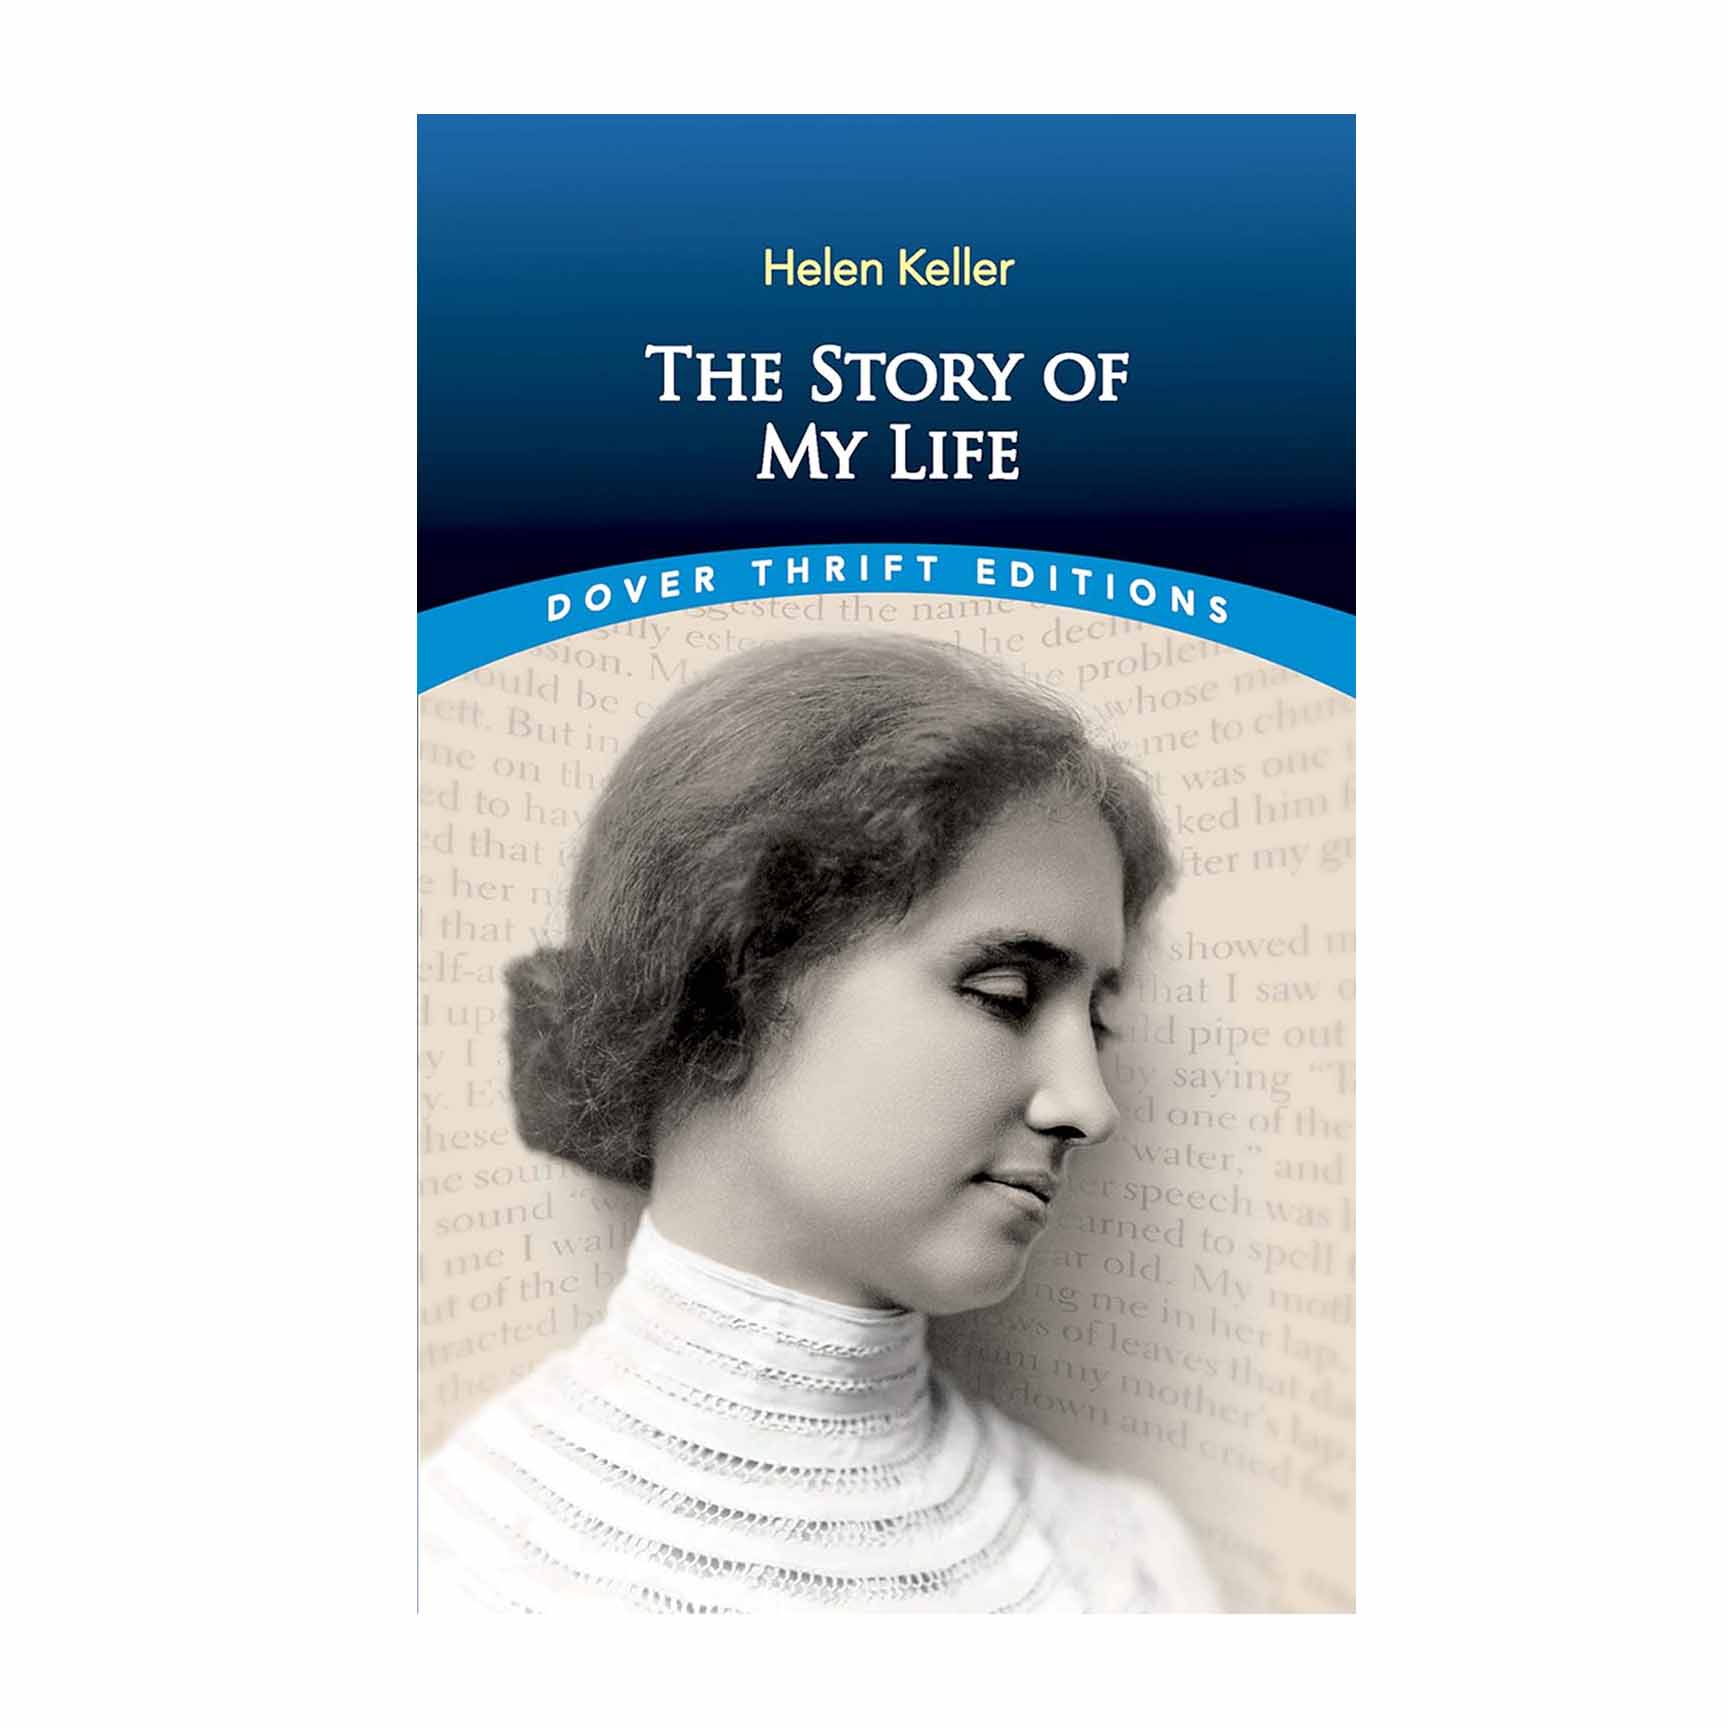 book titled The Story of My Life by Helen Keller 